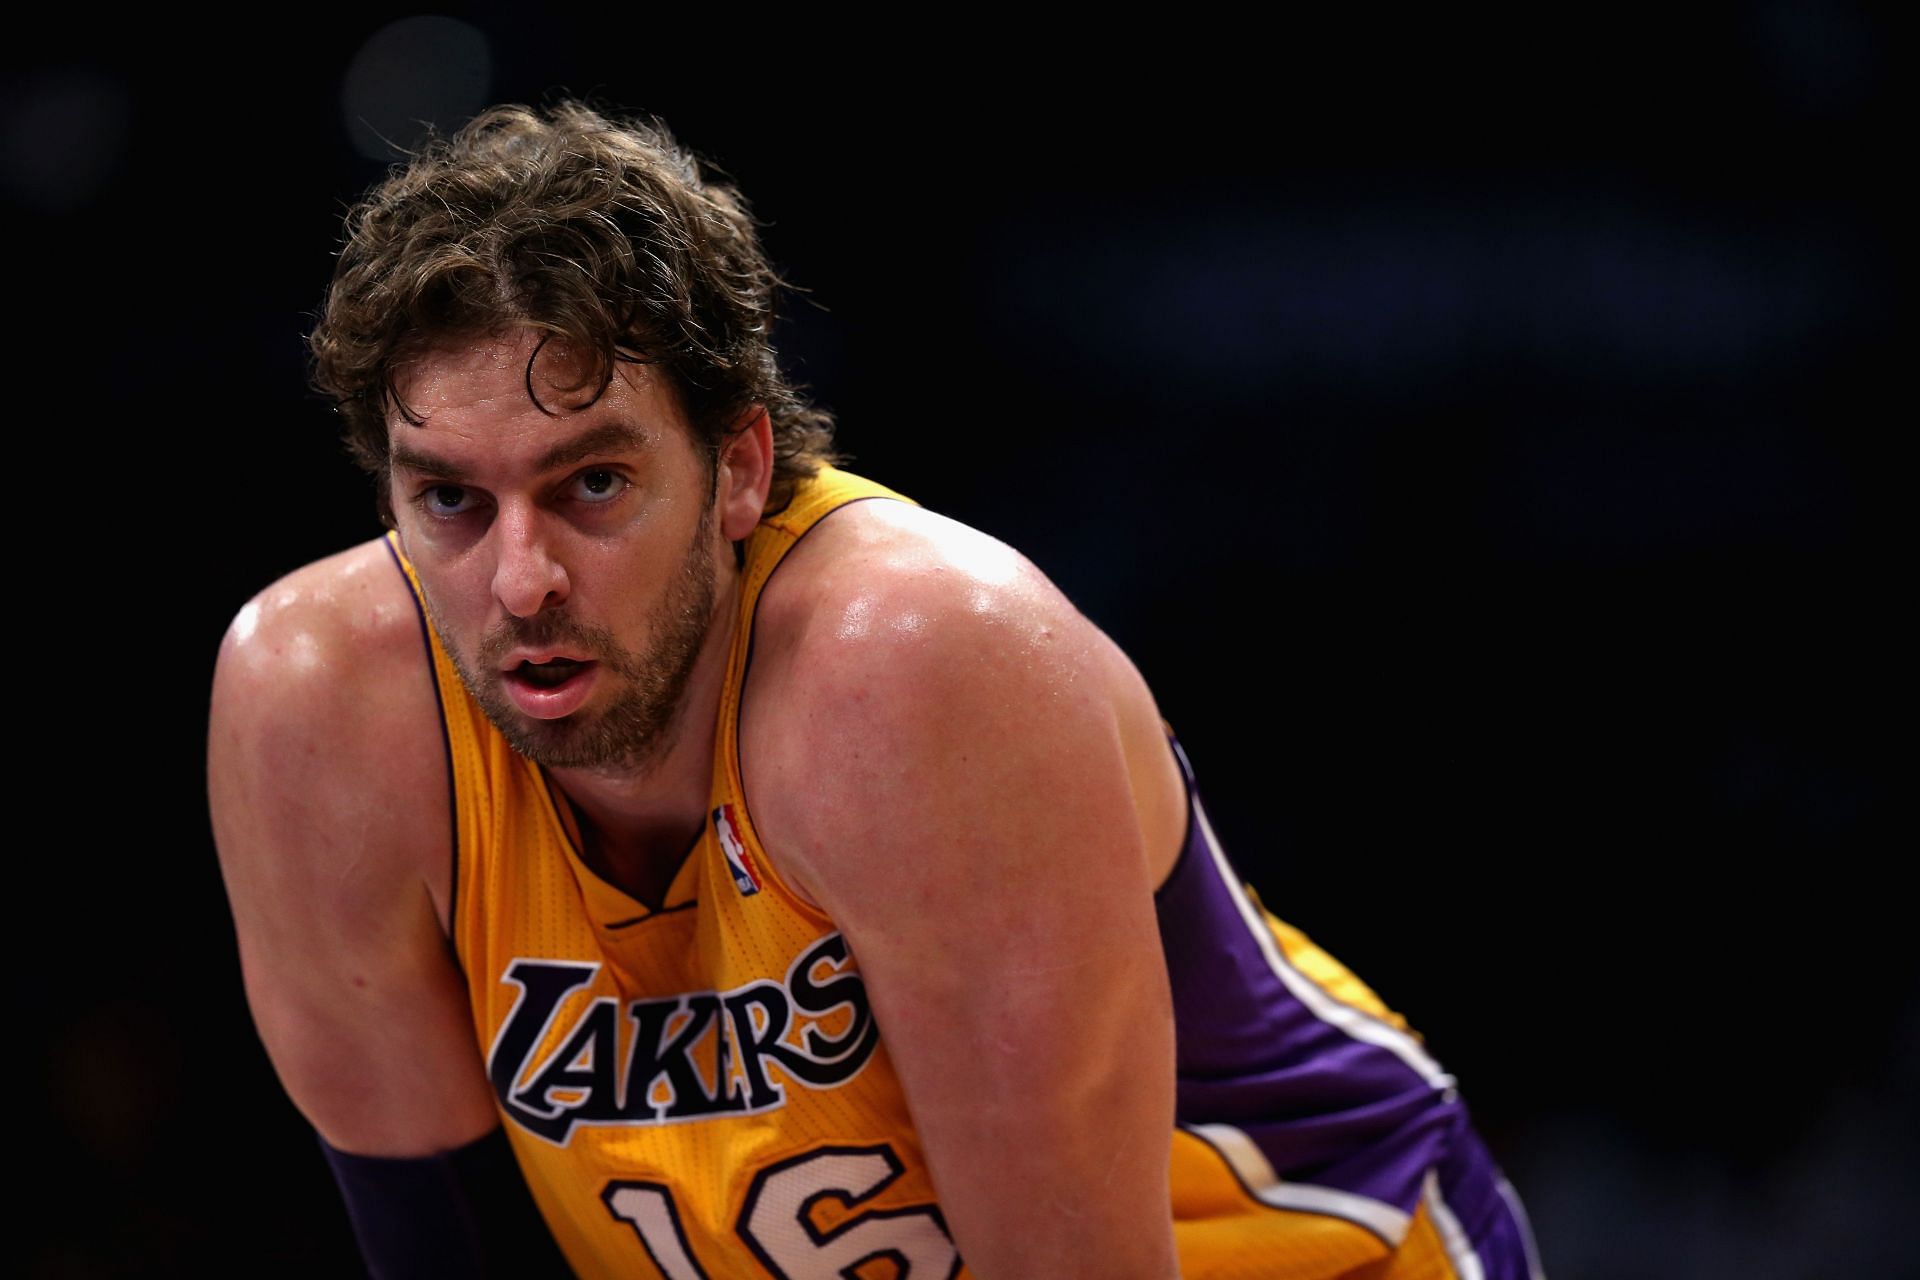 Pau Gasol will forever live by Kobe Bryant's side as the Lakers retire his #16  jersey